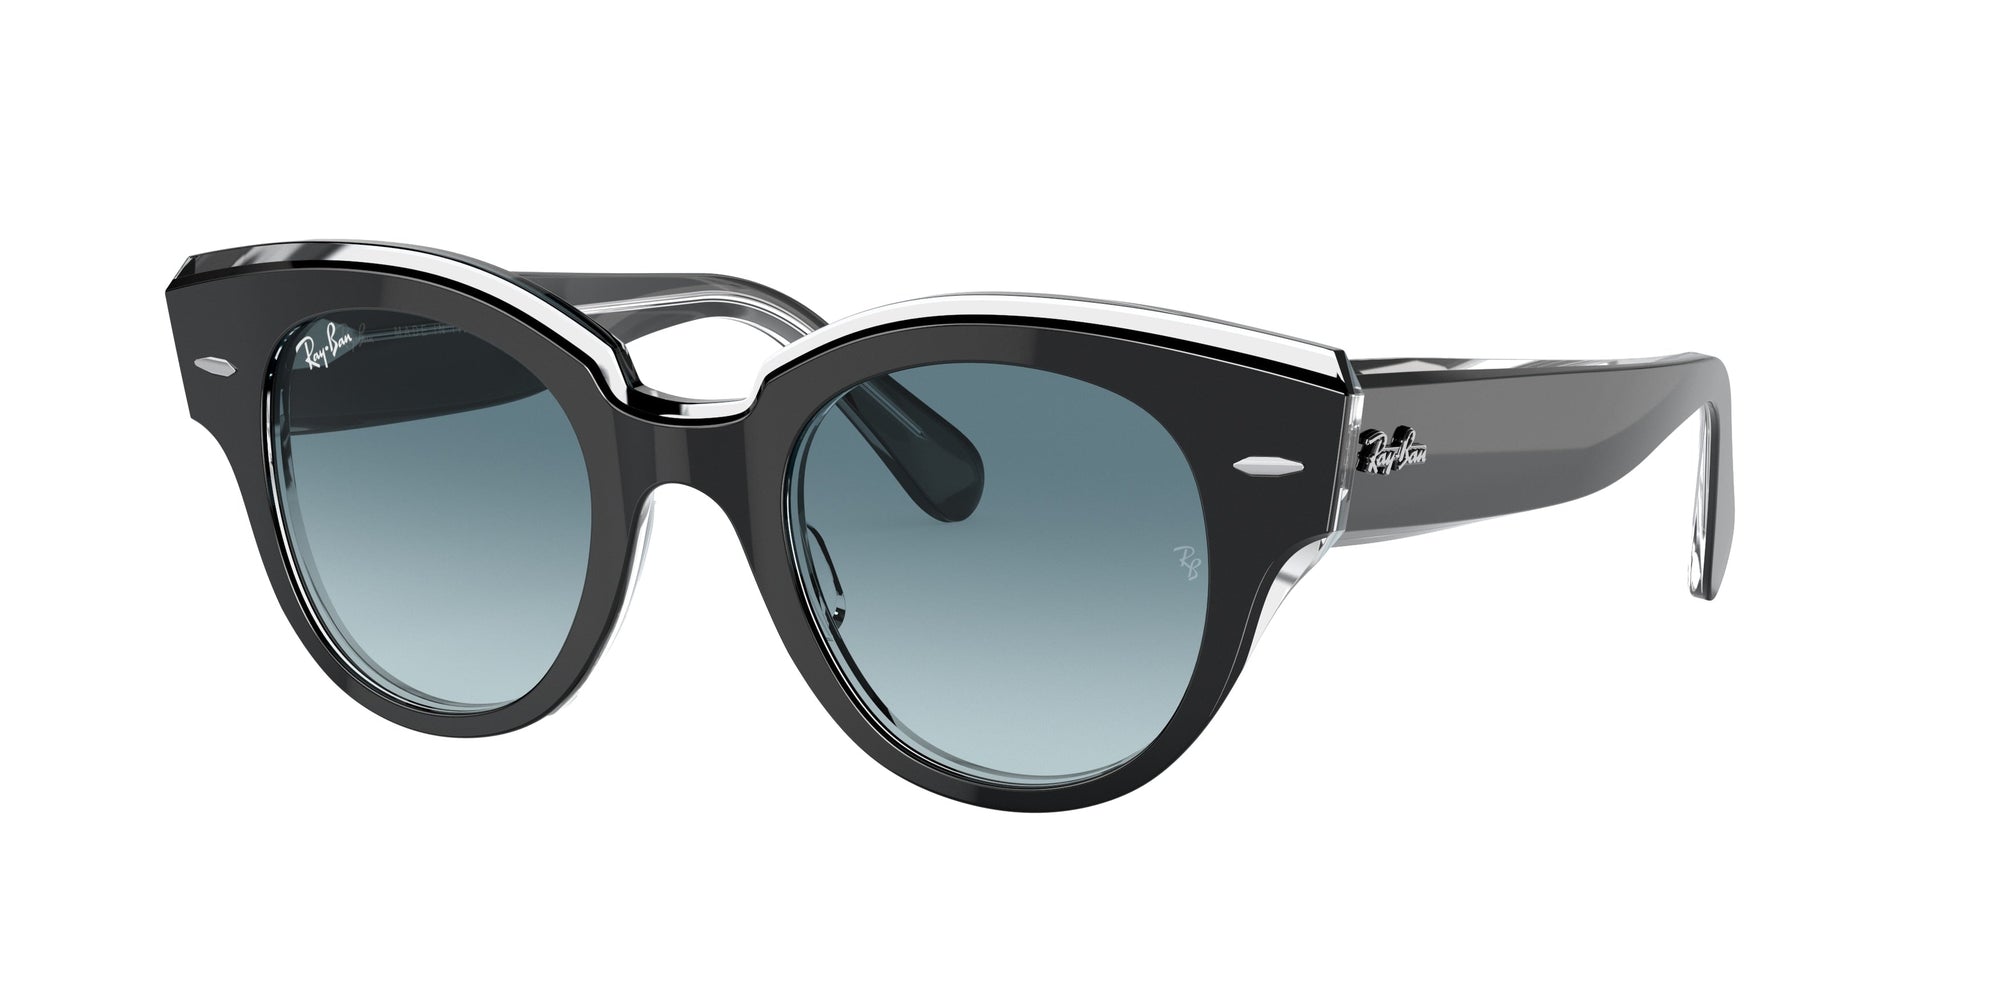 RAY-BAN ROUNDABOUT RB2192